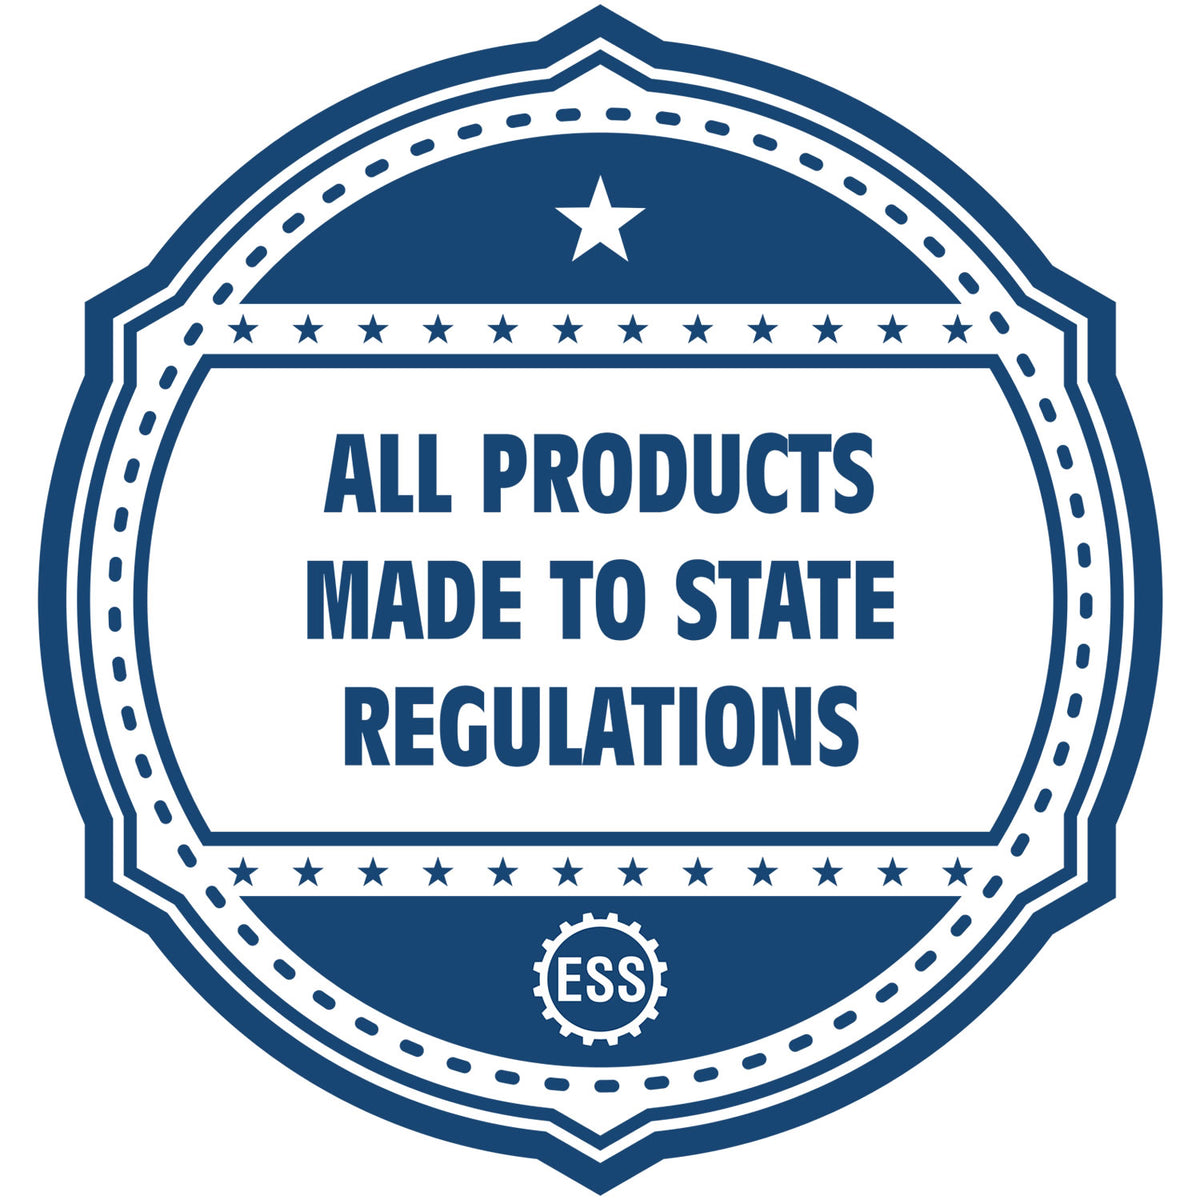 An icon or badge element for the Soft Pocket Utah Landscape Architect Embosser showing that this product is made in compliance with state regulations.